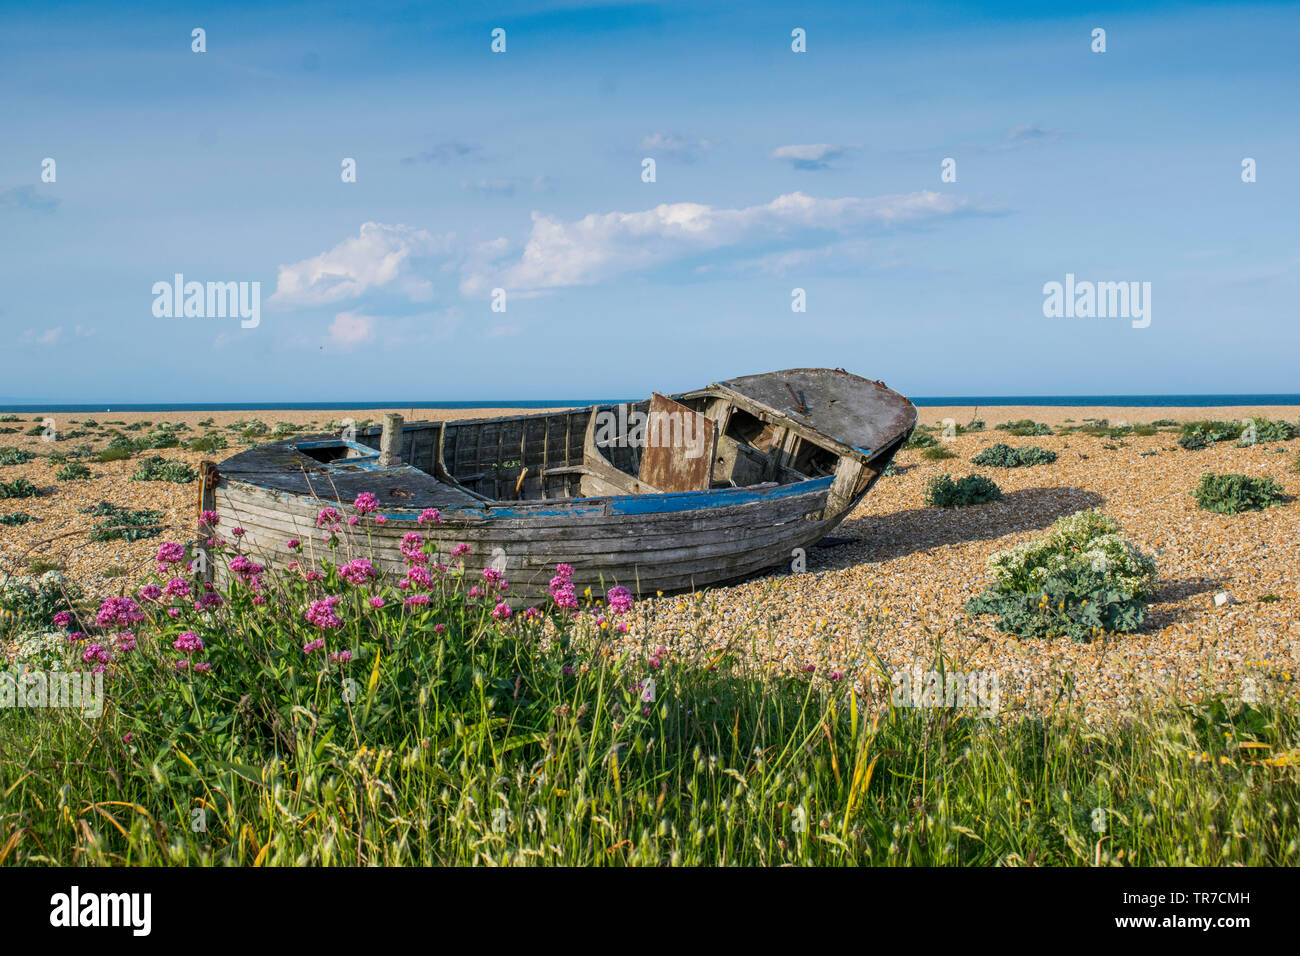 Abandoned wooden fishing boat on a pebble beach Stock Photo